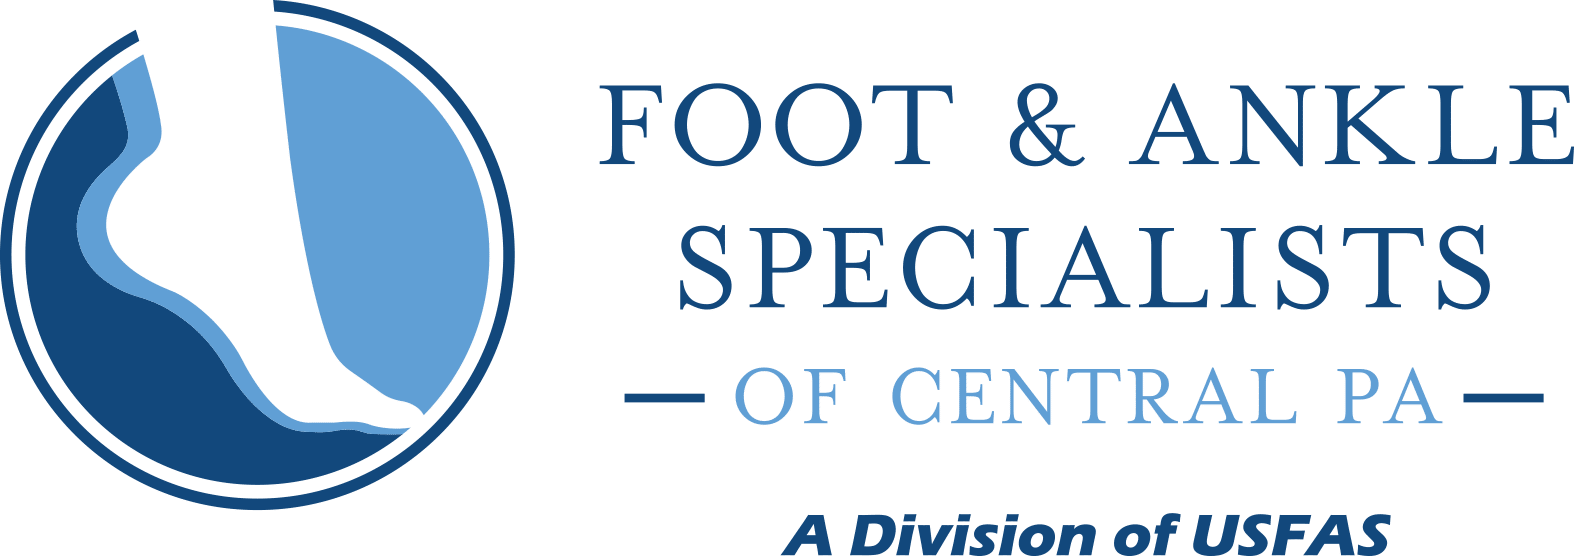 Foot Ankle Specialists